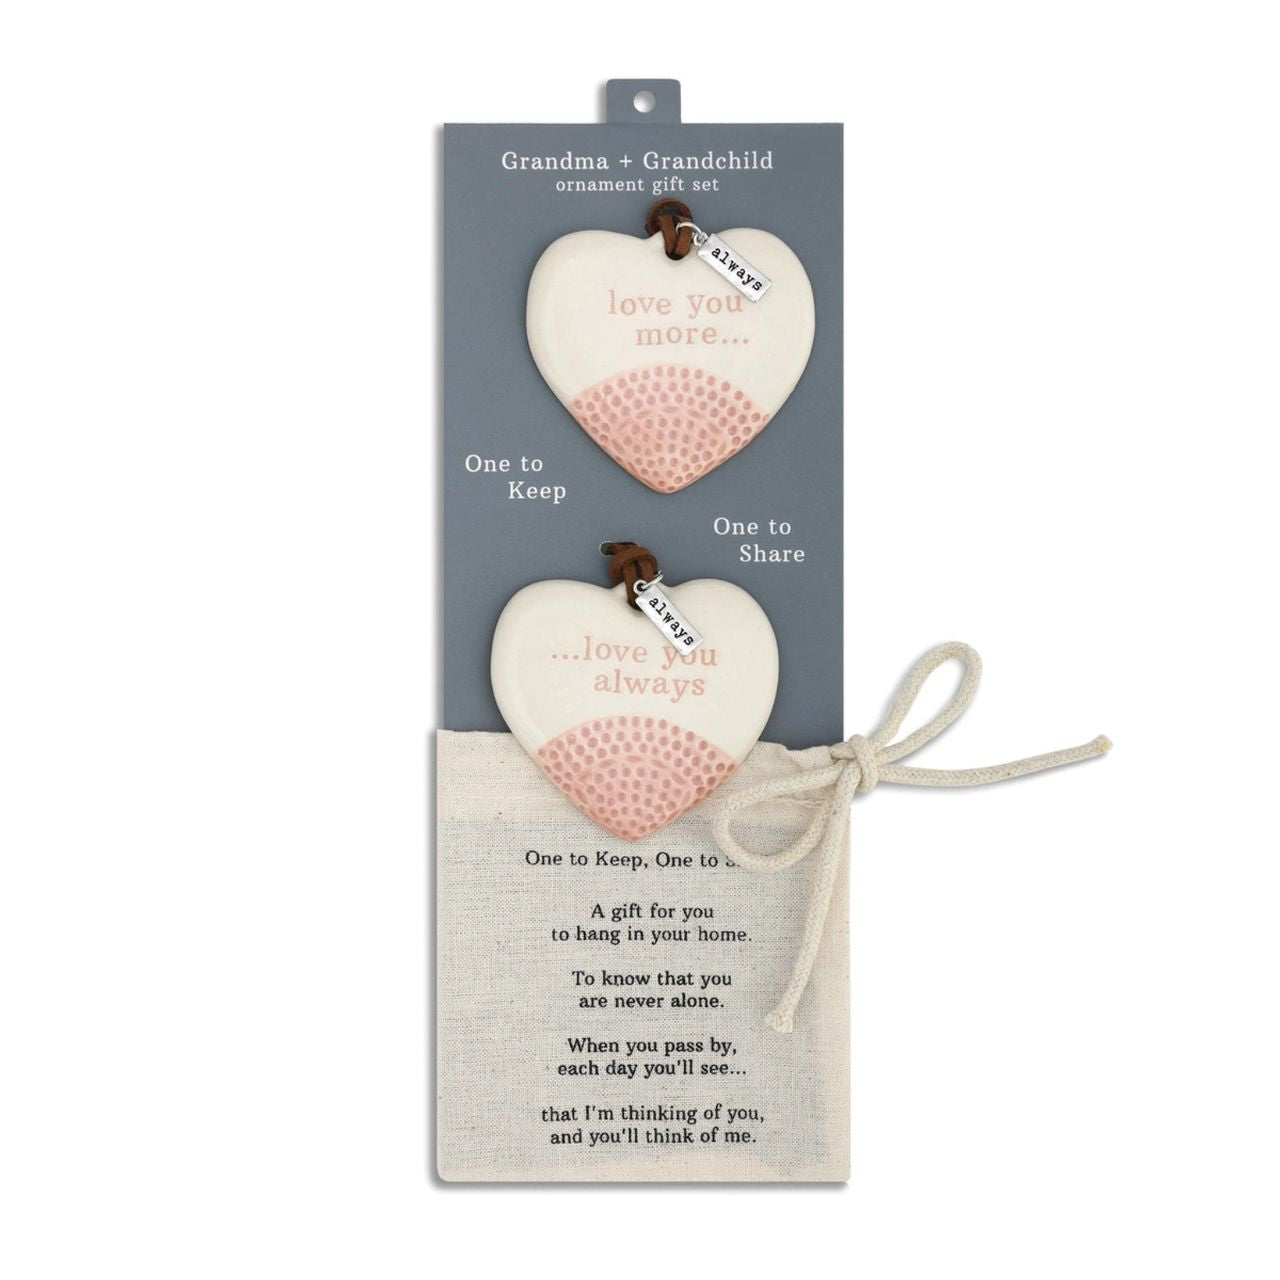 Grandma One to Keep, One to Share Ornament Set  Grandma and Grandchild One to Keep, One to Share Ornament set reminds you of the eternal love between the giver and the receiver where they go. Each heart representing the grandchild and grandmother, keep one on yourself or hang it up in a special place.